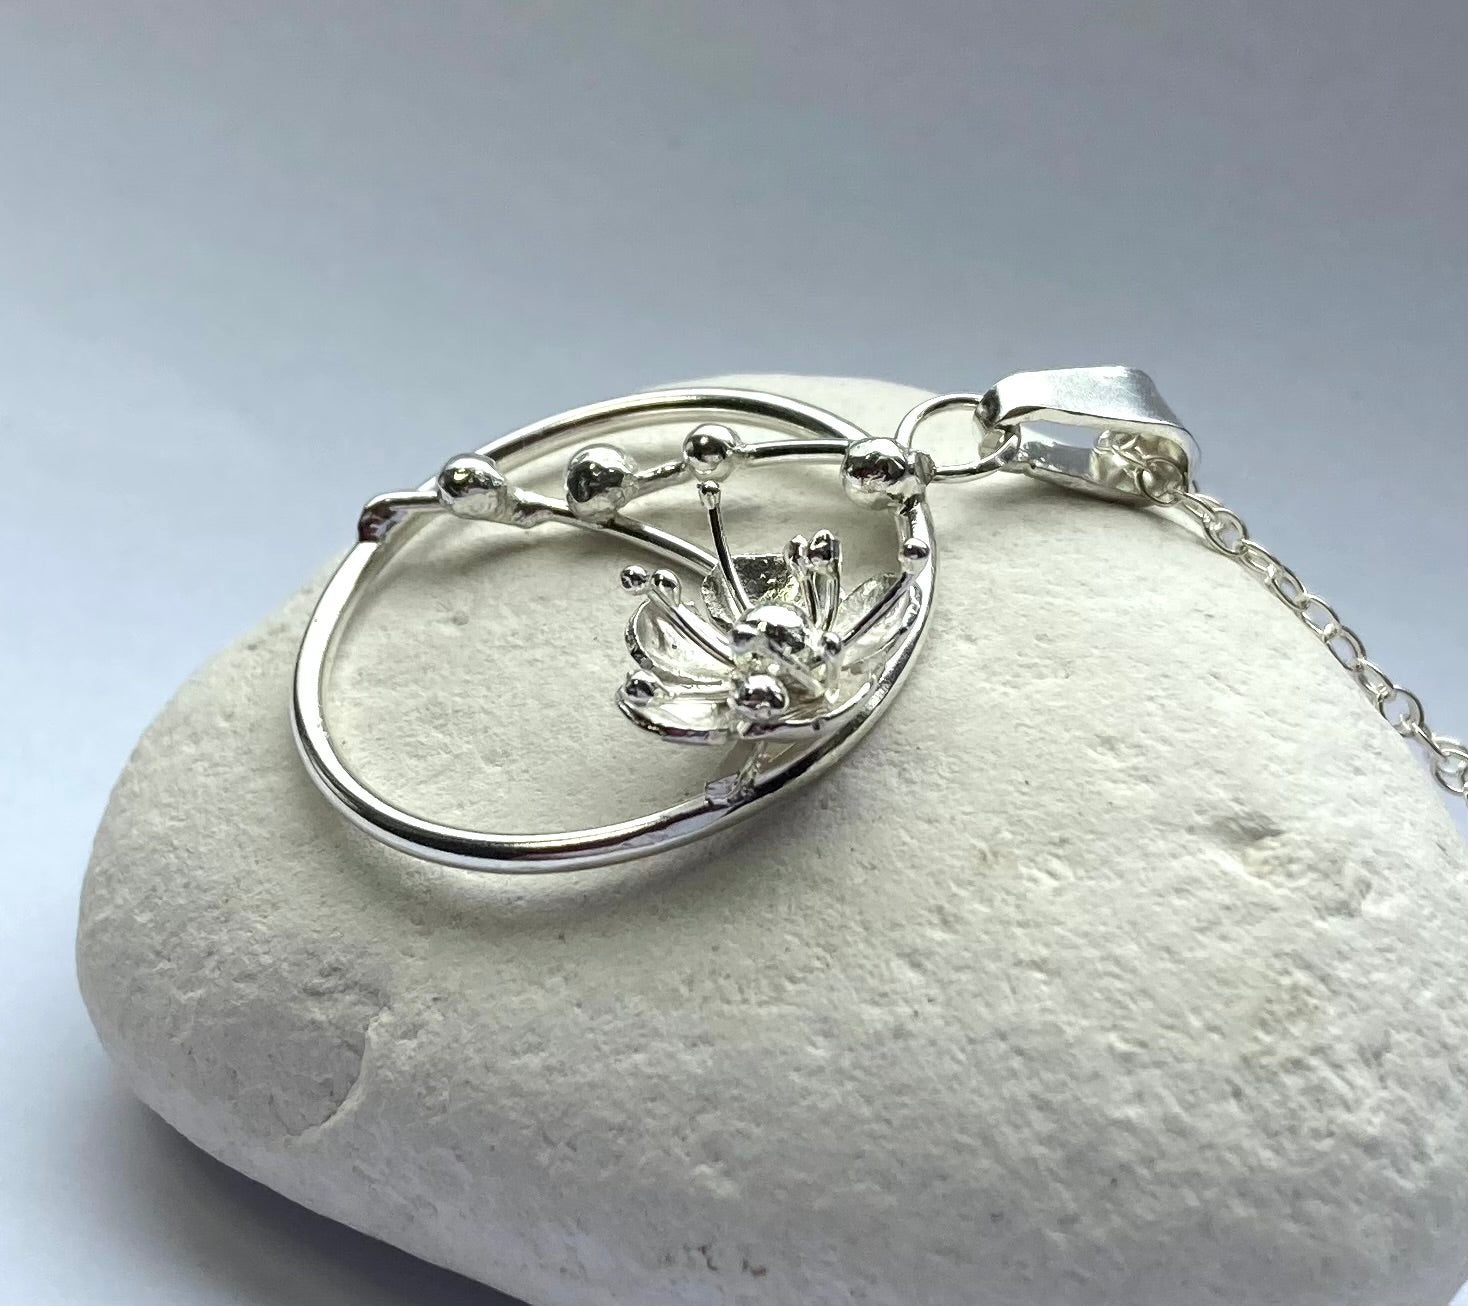 close up of cherry blossom hand forged circle pendant showing stamens, resting on white pebble